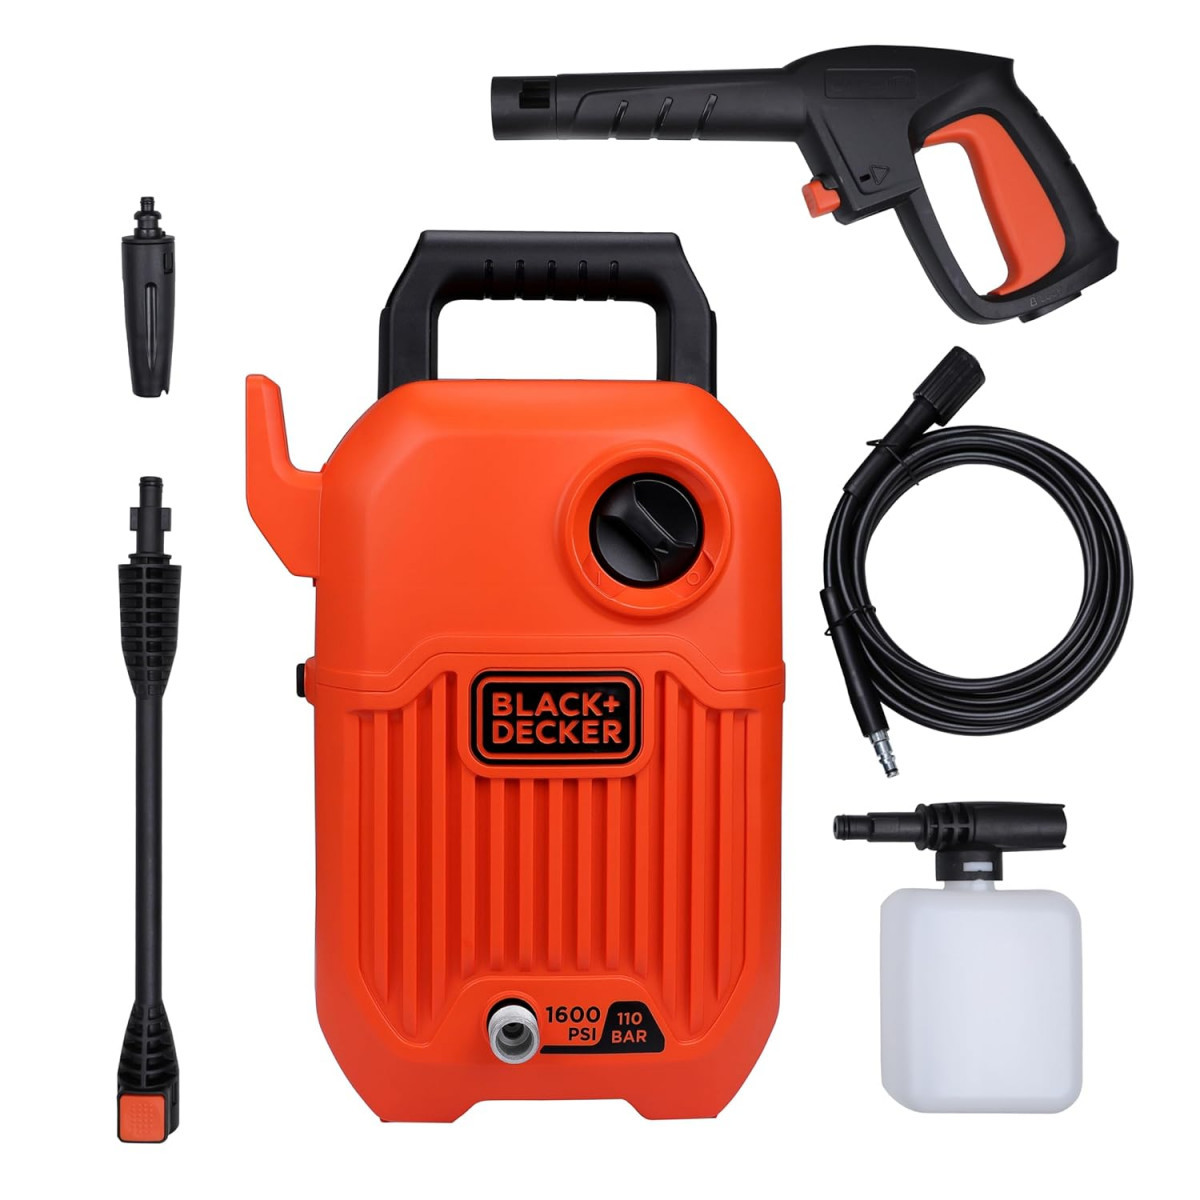 BLACKDECKER BEPW1600 1300W 1600 PSI 110 Bar Pressure Washer for Car Bike Home  Garden Cleaning Use with Multiple Accessories Included 1 Year Warranty Orange  Black